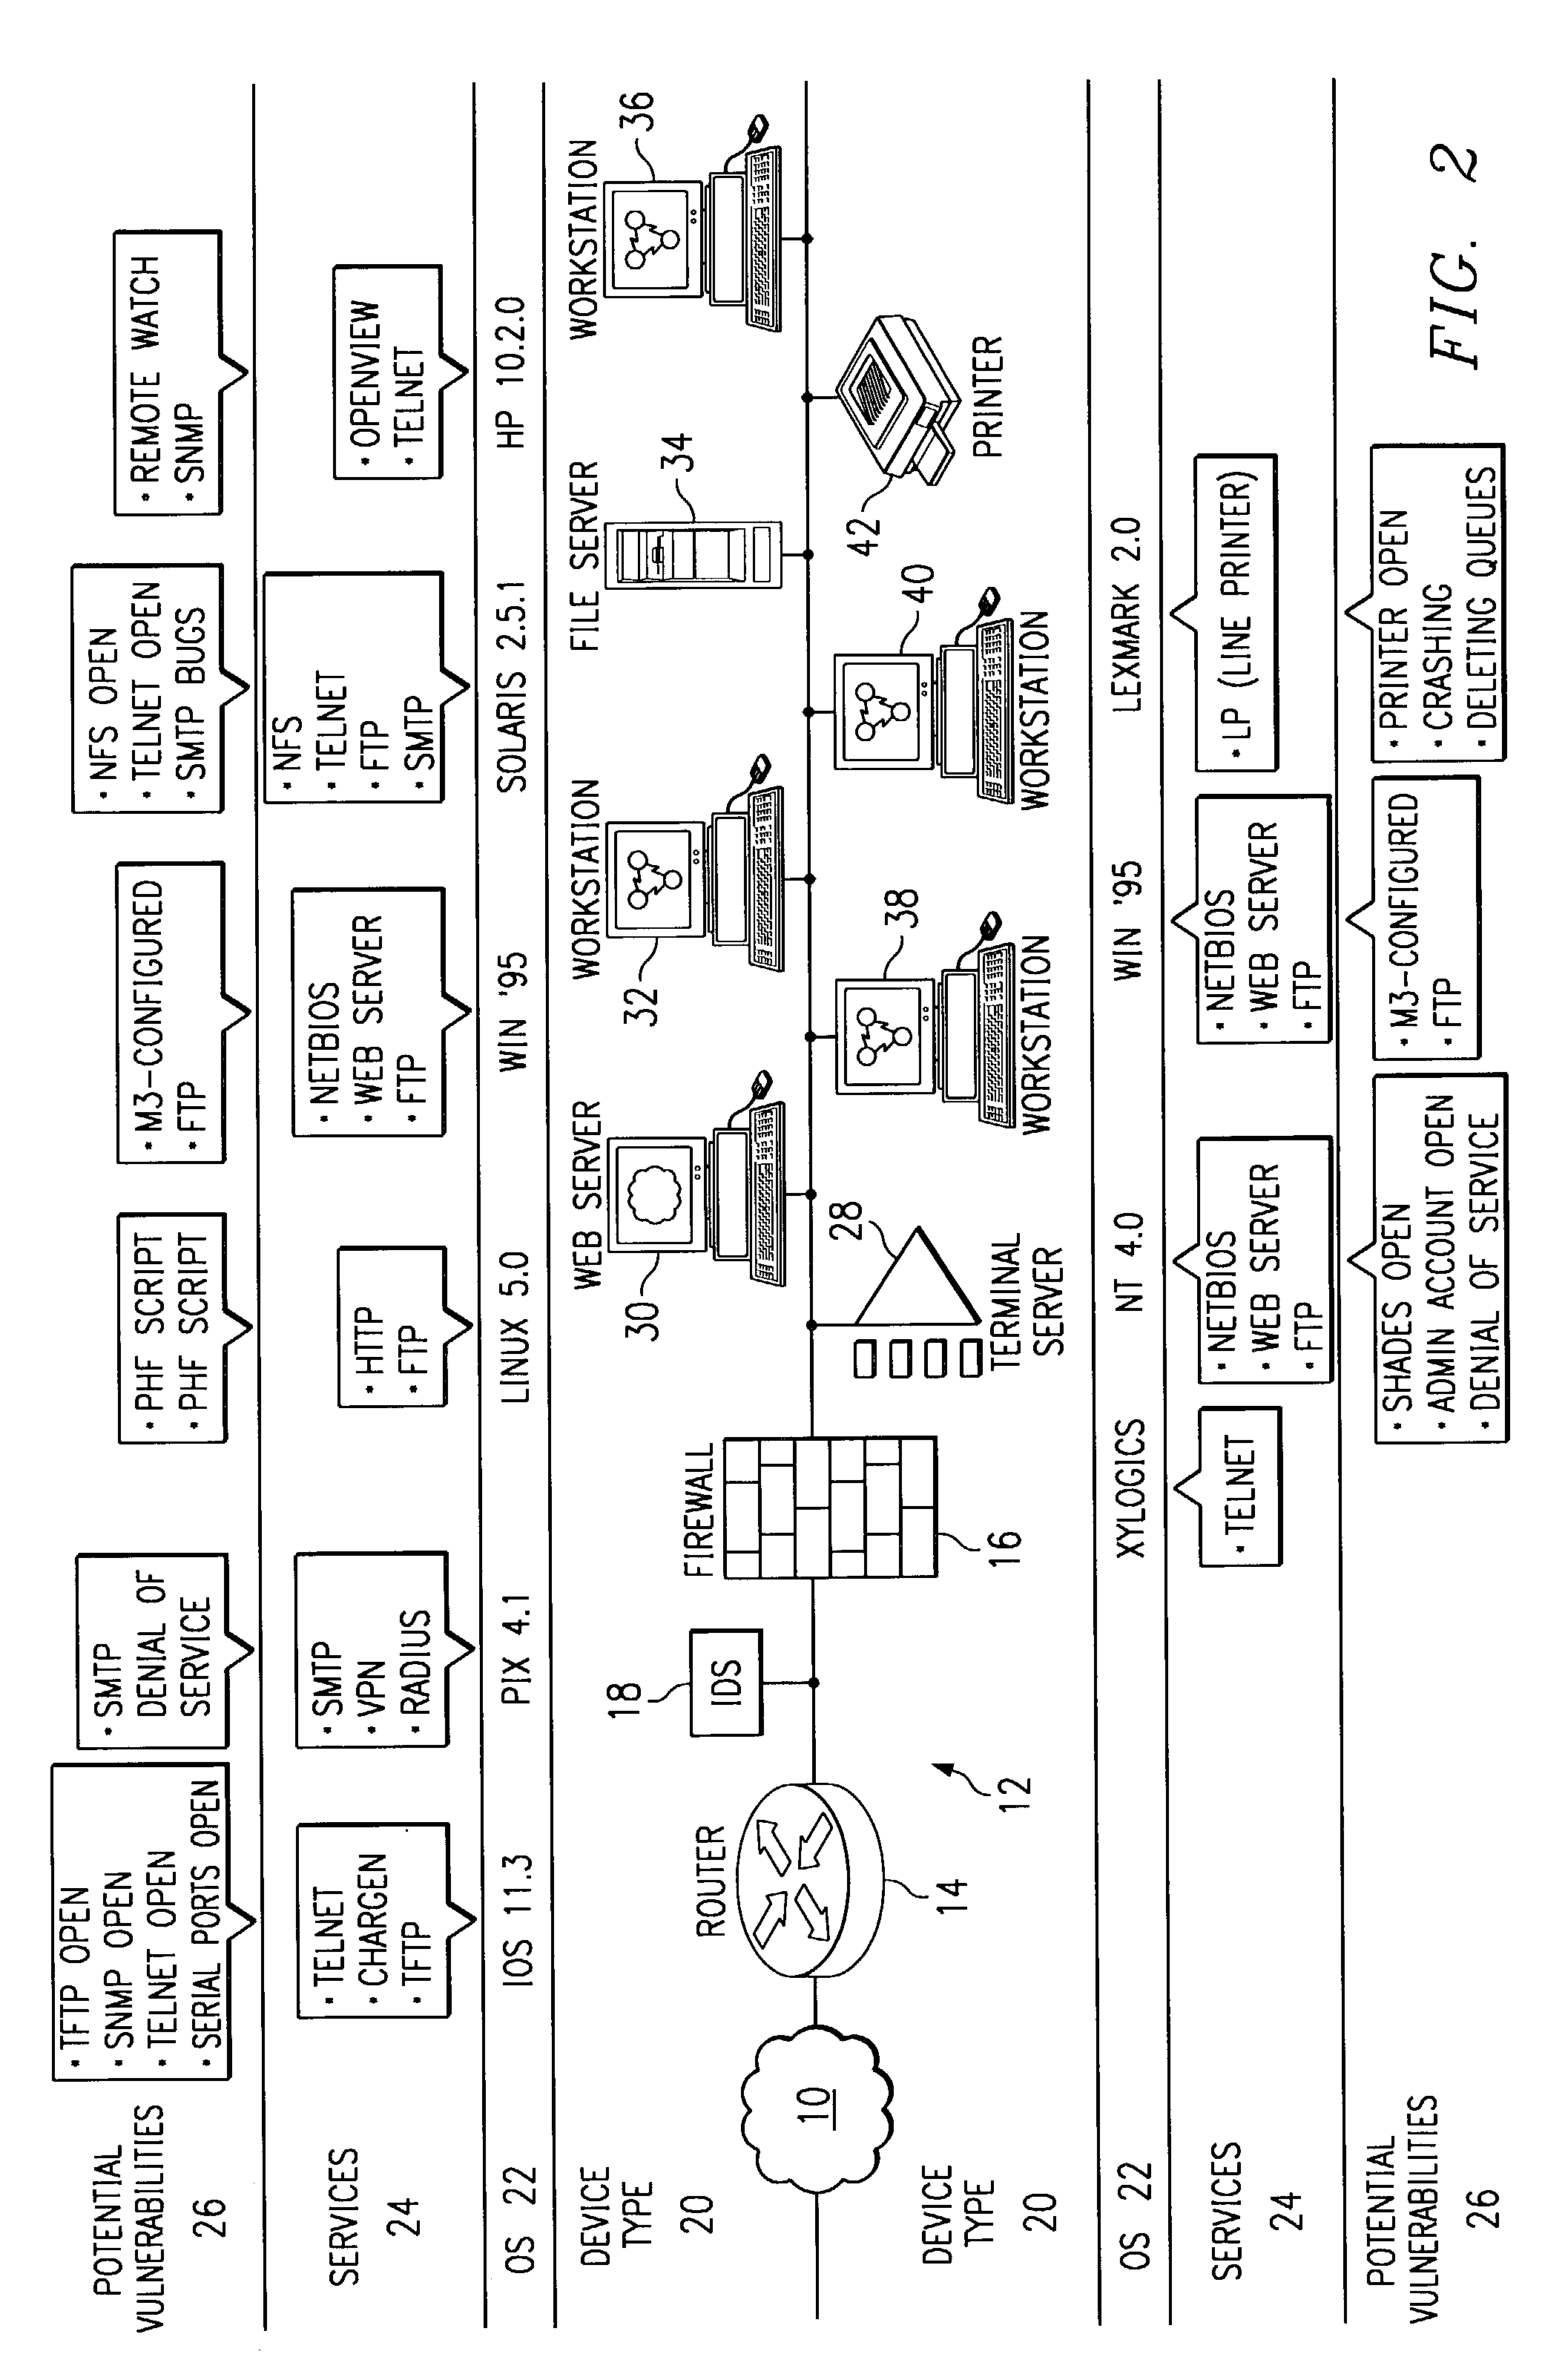 Method and system for mapping a network for system security